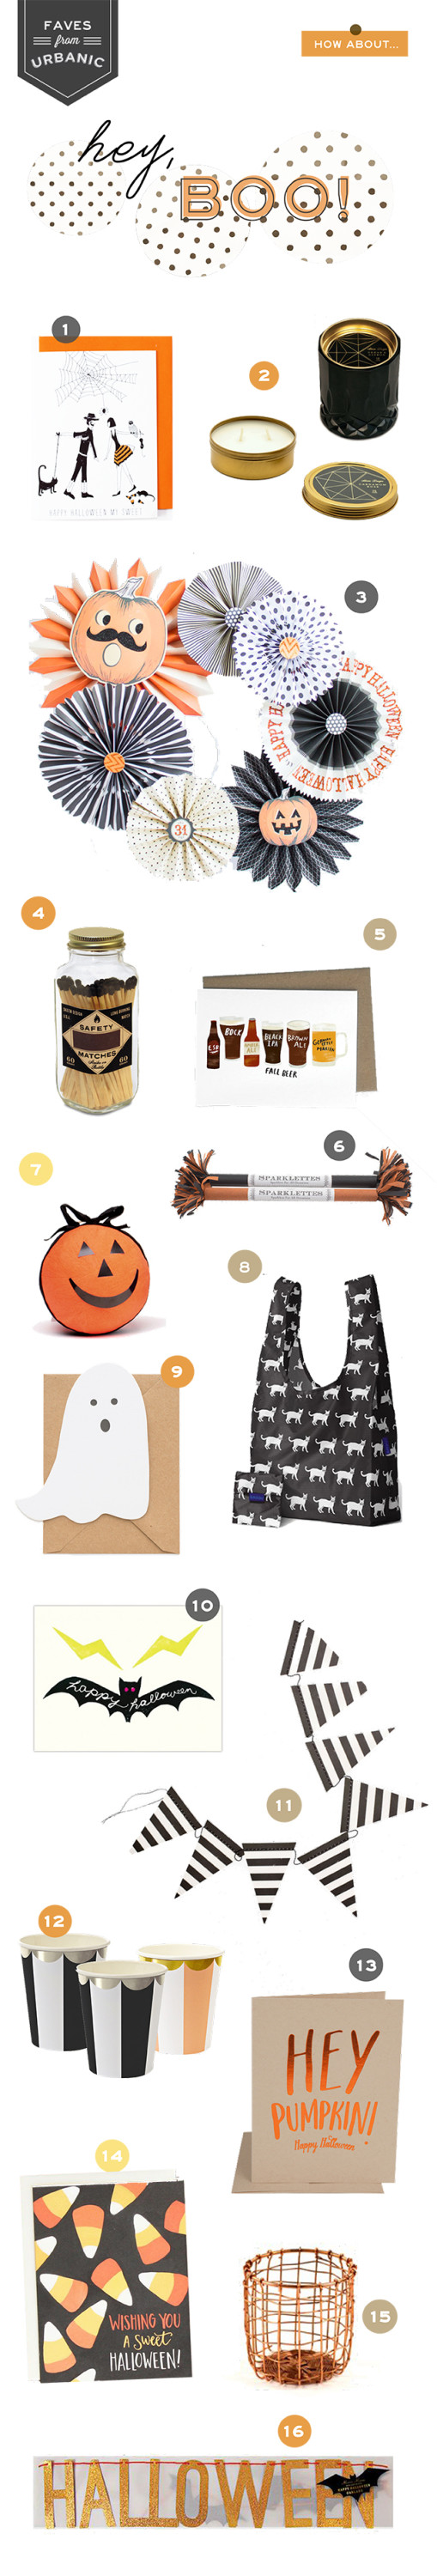 Urbanic Faves: heyBOO! Halloween Round Up / Oh So Beautiful Paper